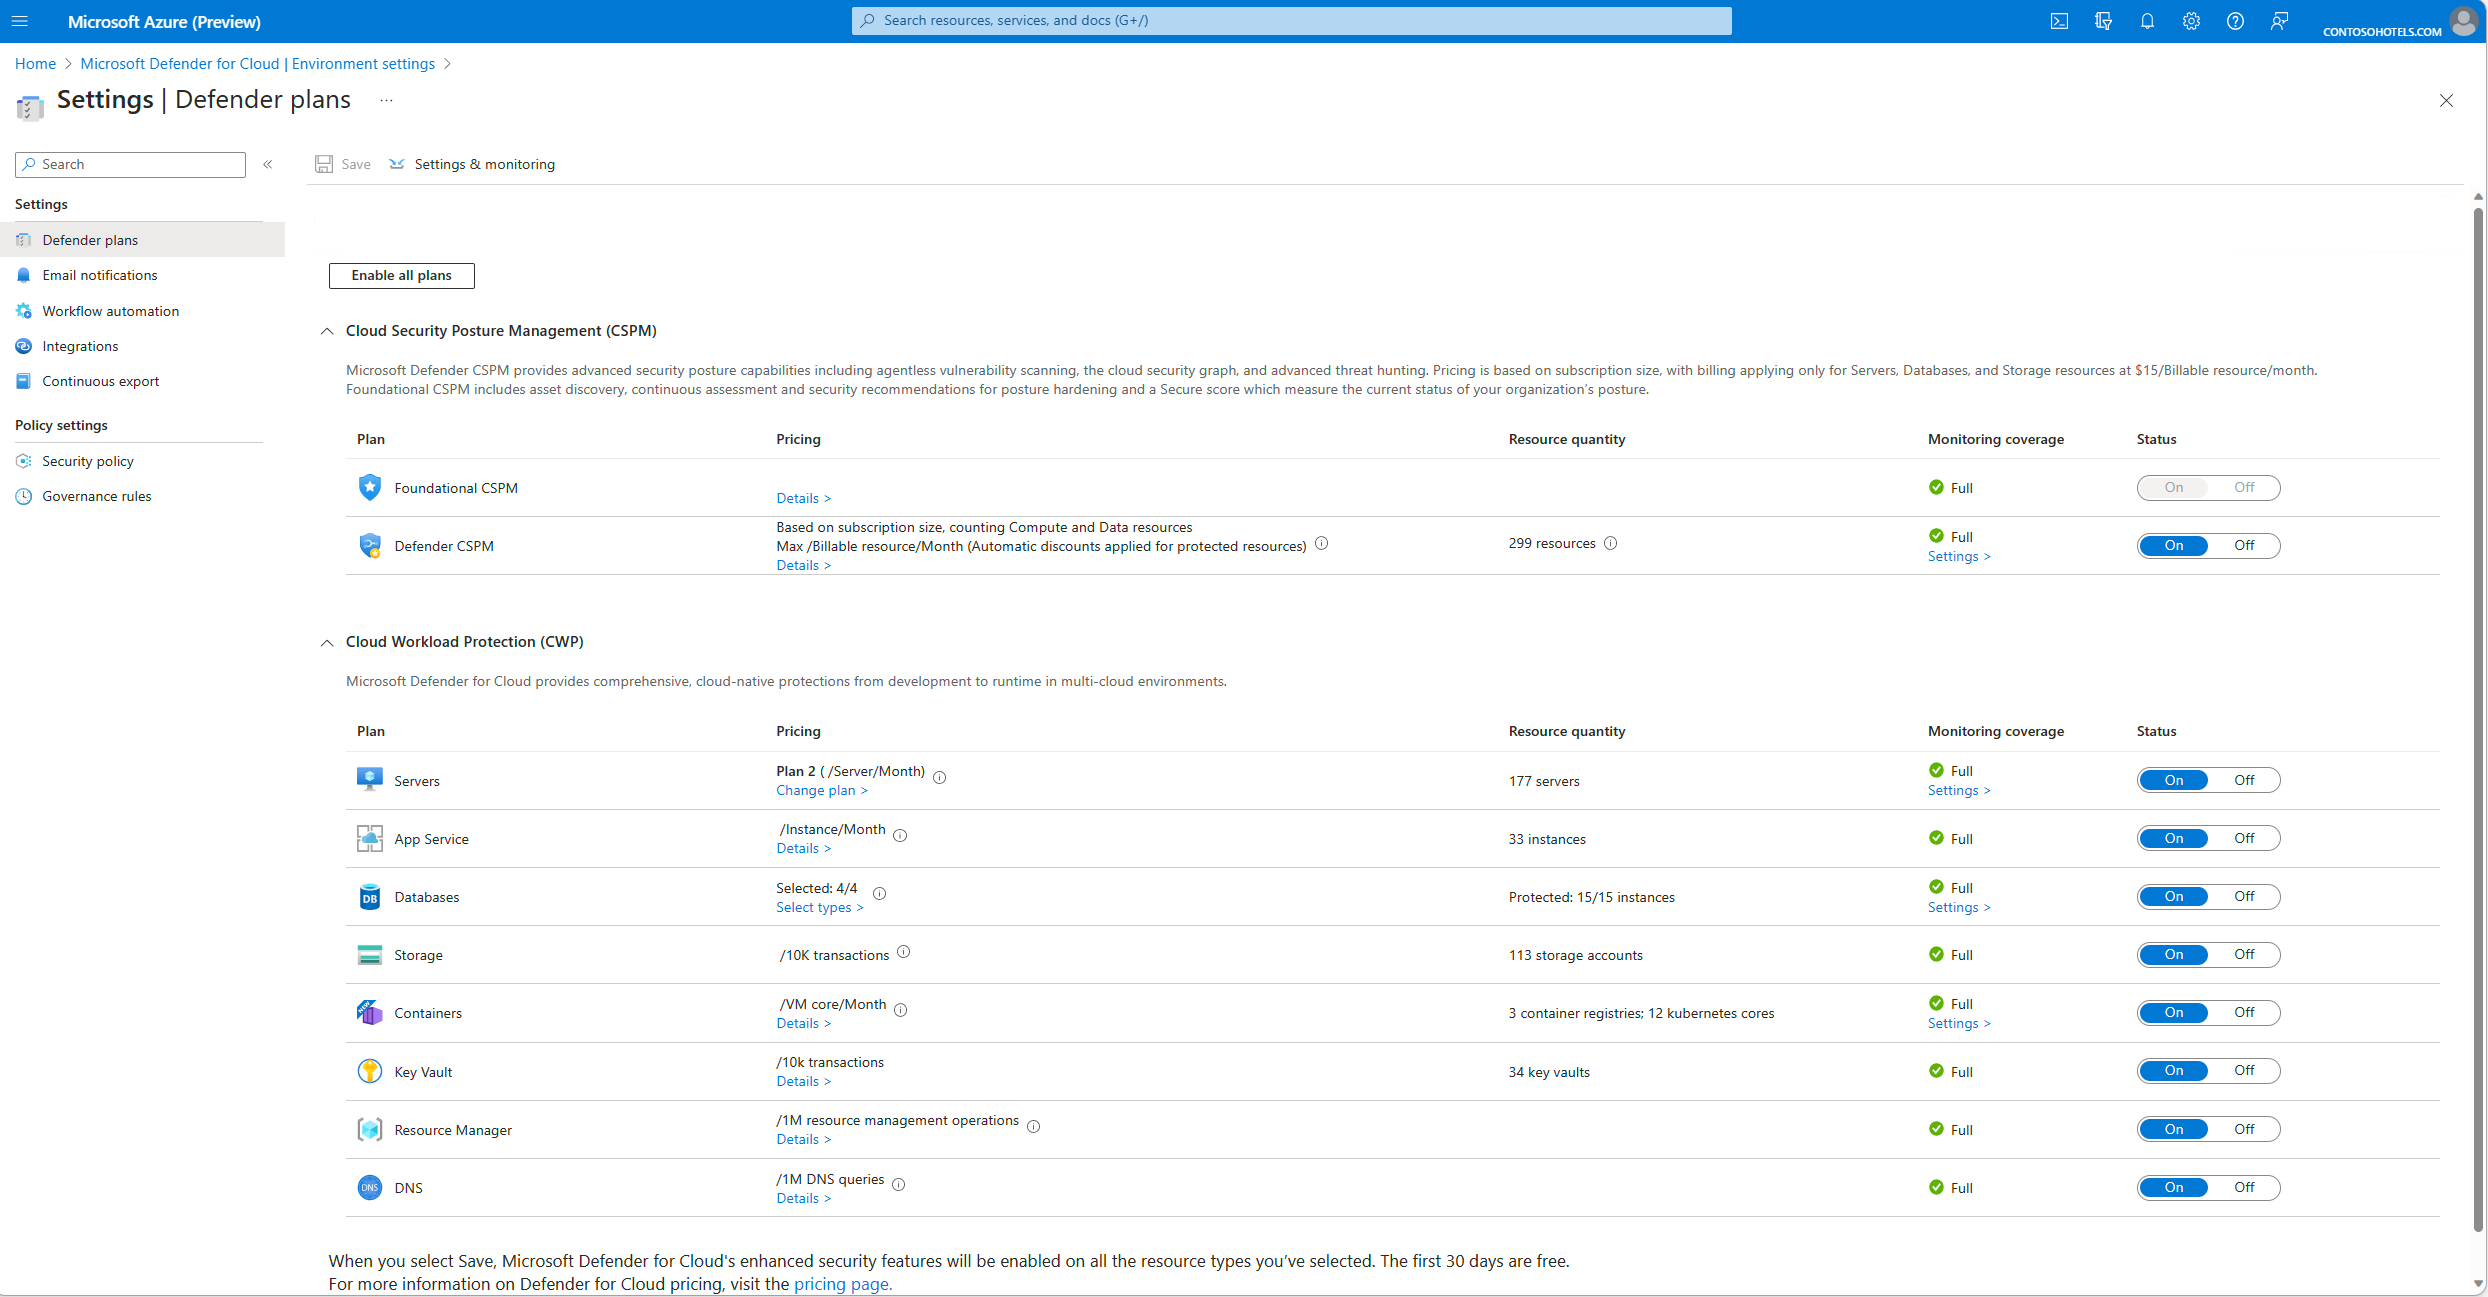 Screenshot of monitoring coverage of Microsoft Defender for Cloud extensions.